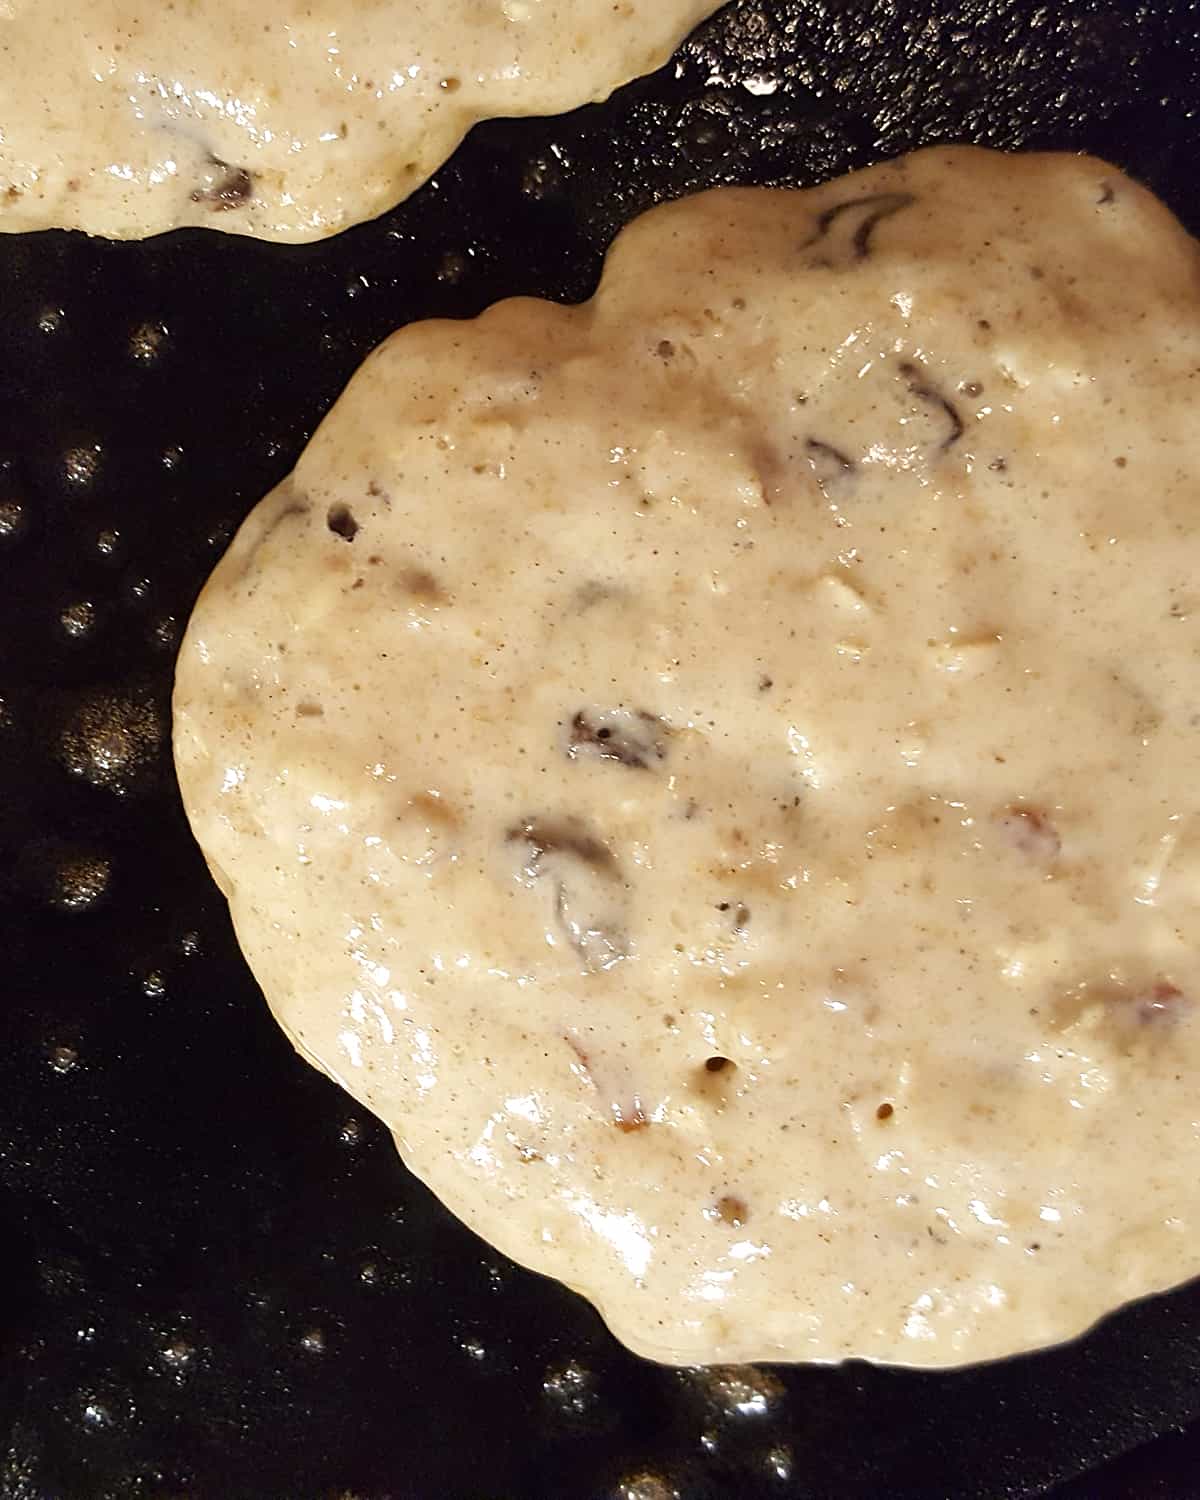 Closeup view of pancake cooking illustrating how bubbles appear on the surface.